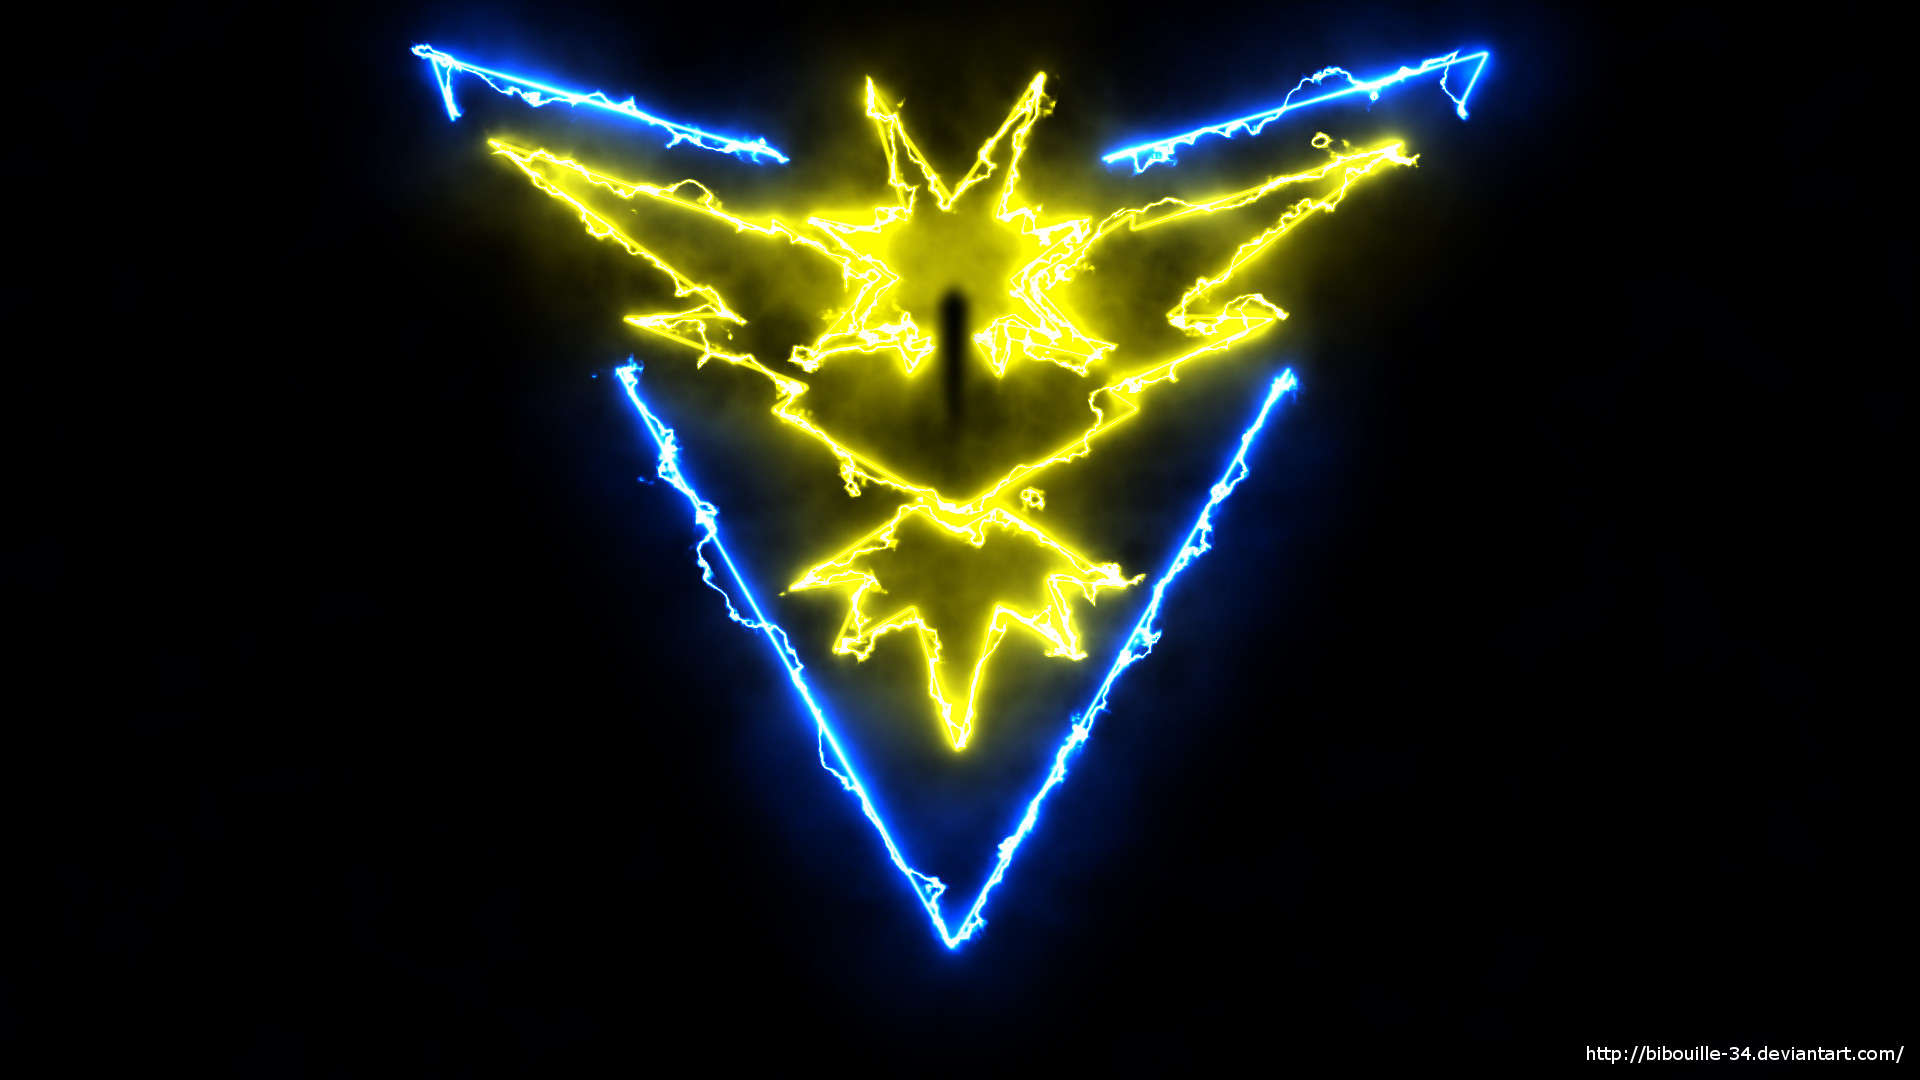 Zapdos Wallpaper The Best Image In